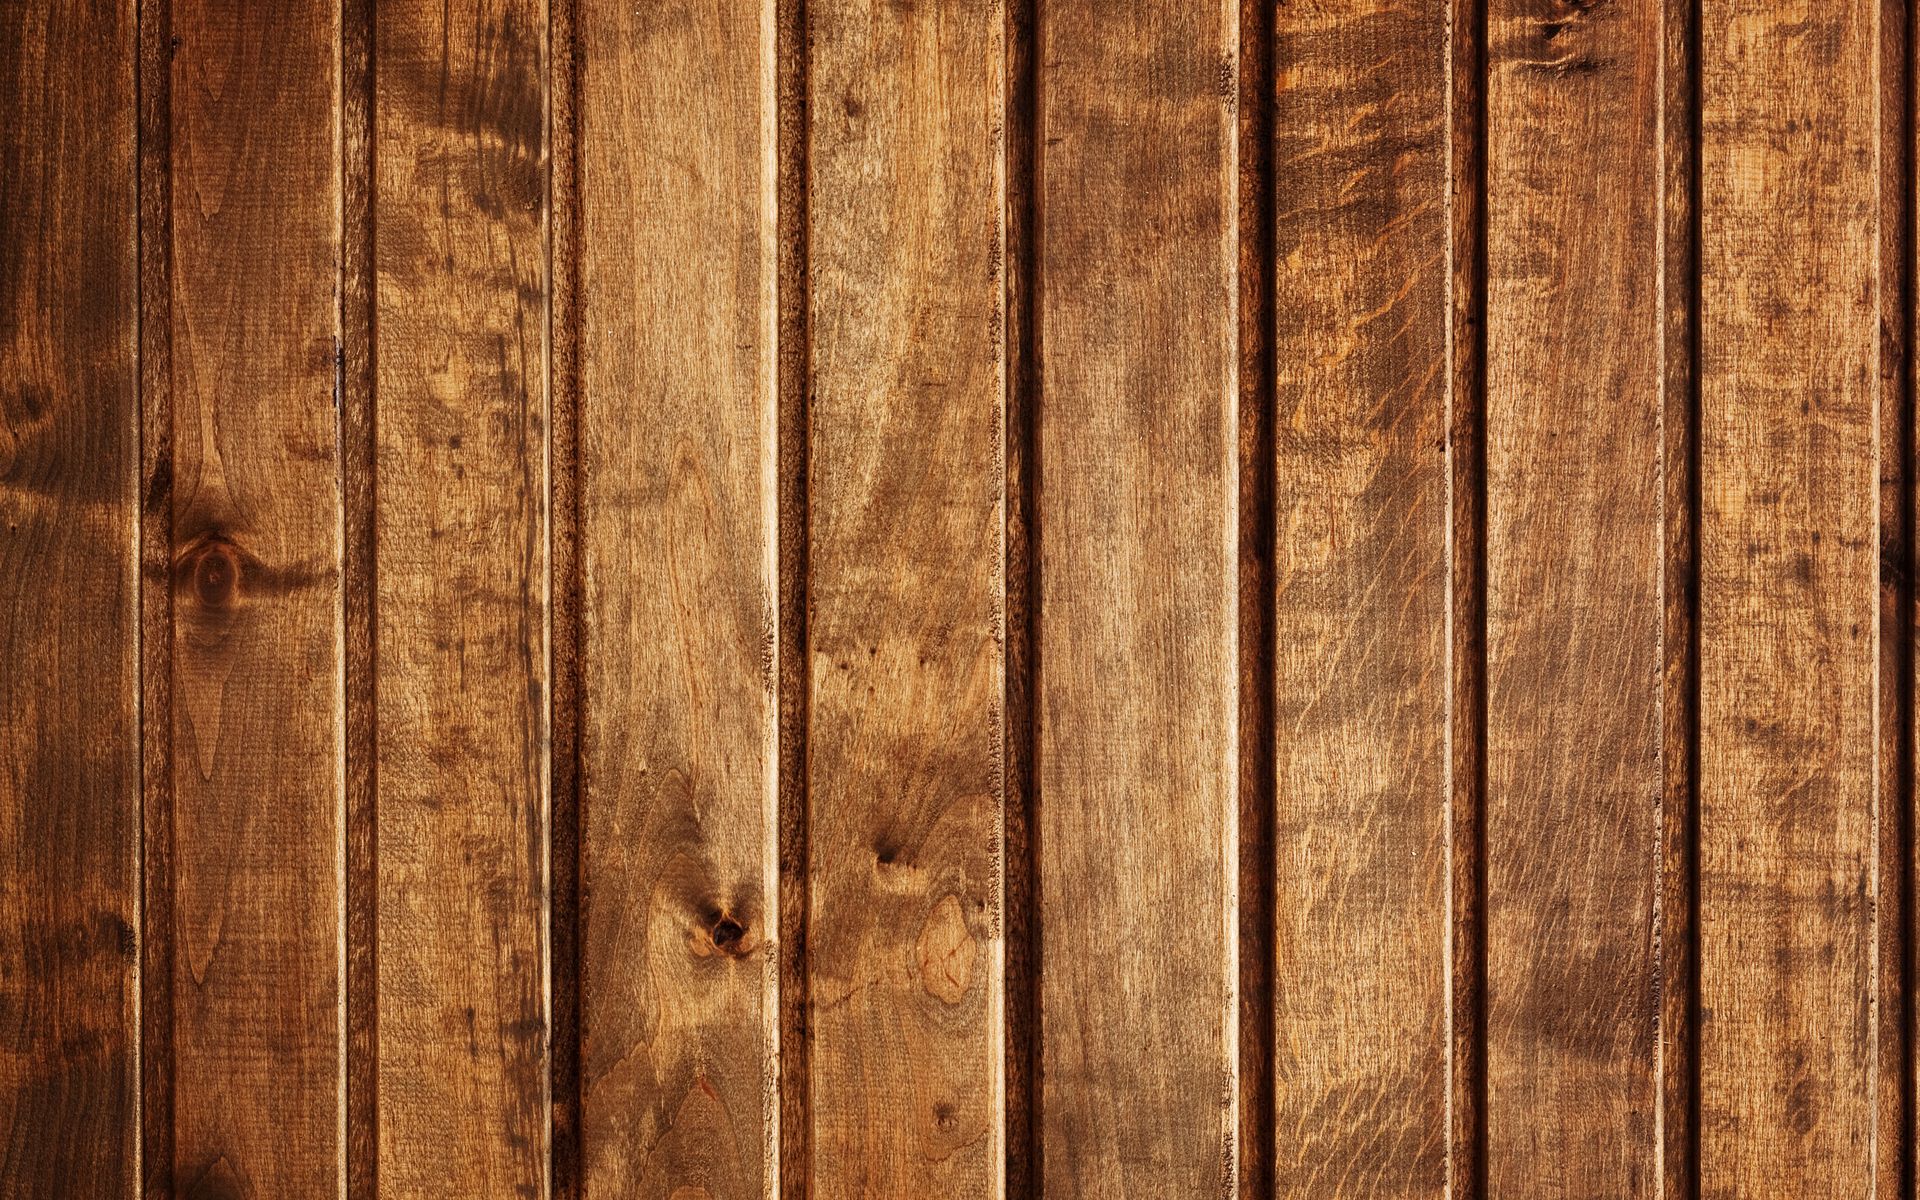 30 Amazing Free Wood Texture Backgrounds | Tech-Lovers l Web ...